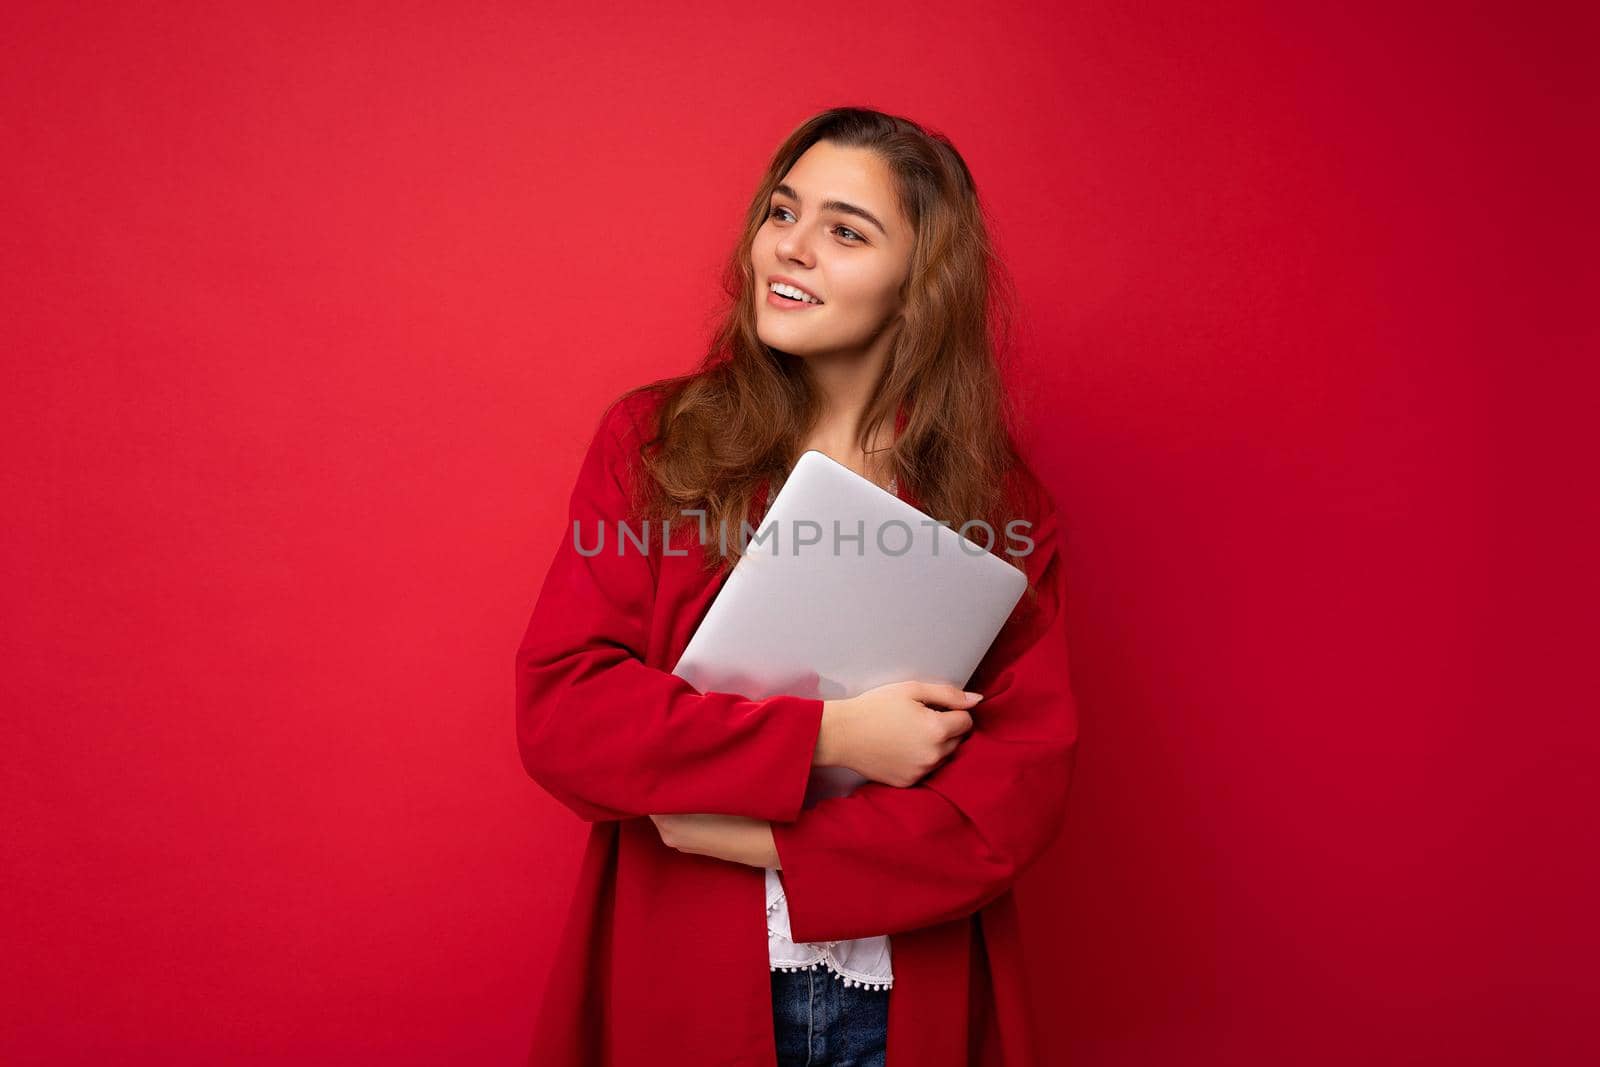 shot of mysterious Beautiful young dark hair curly woman holding close laptop wearing red cardigan and white blouse looking to the side isolated over red background.